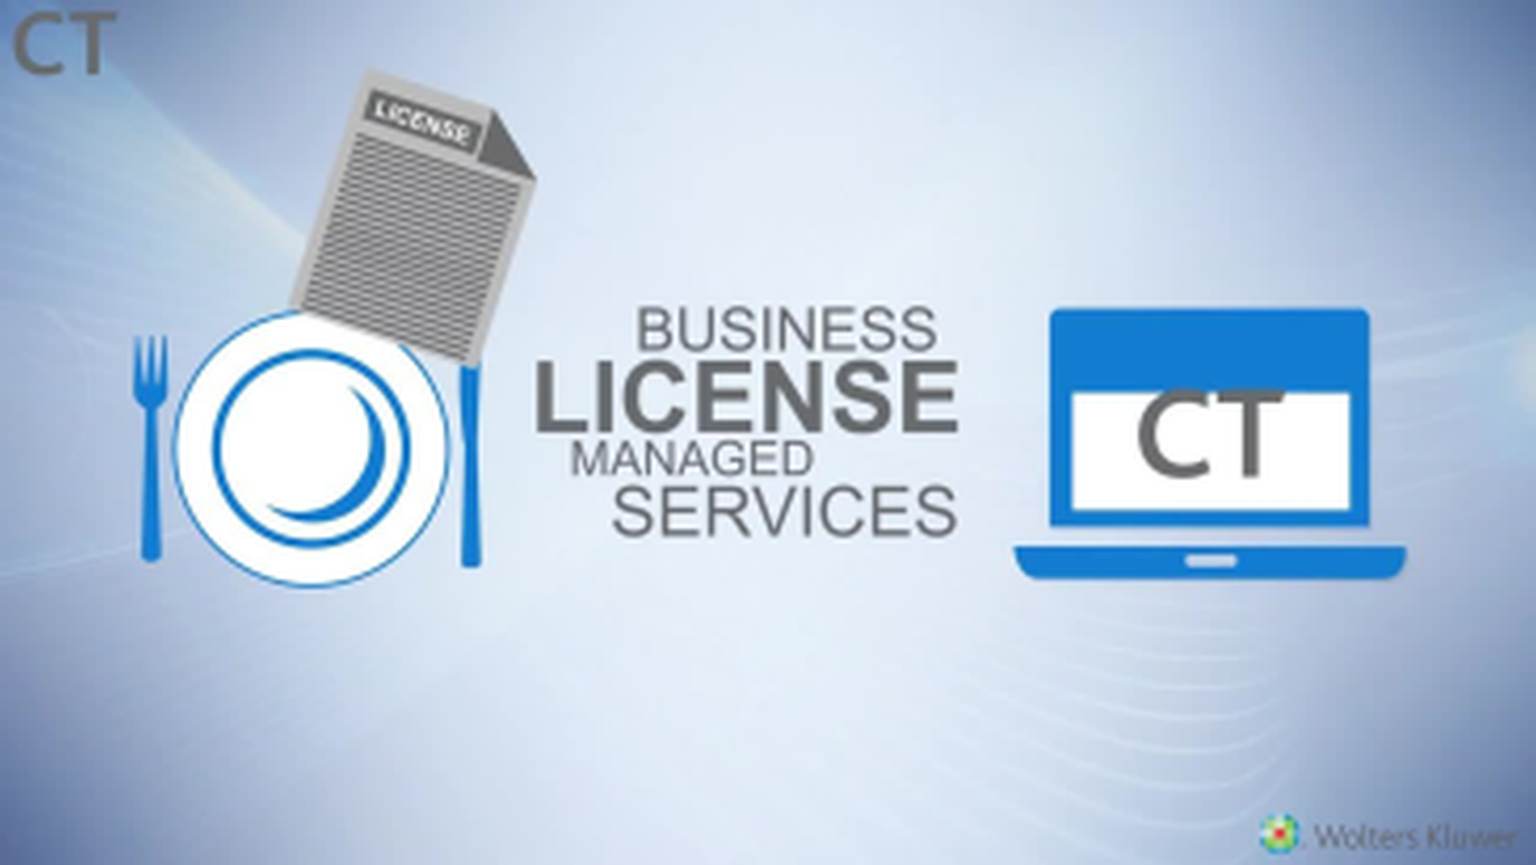 CT business license managed services